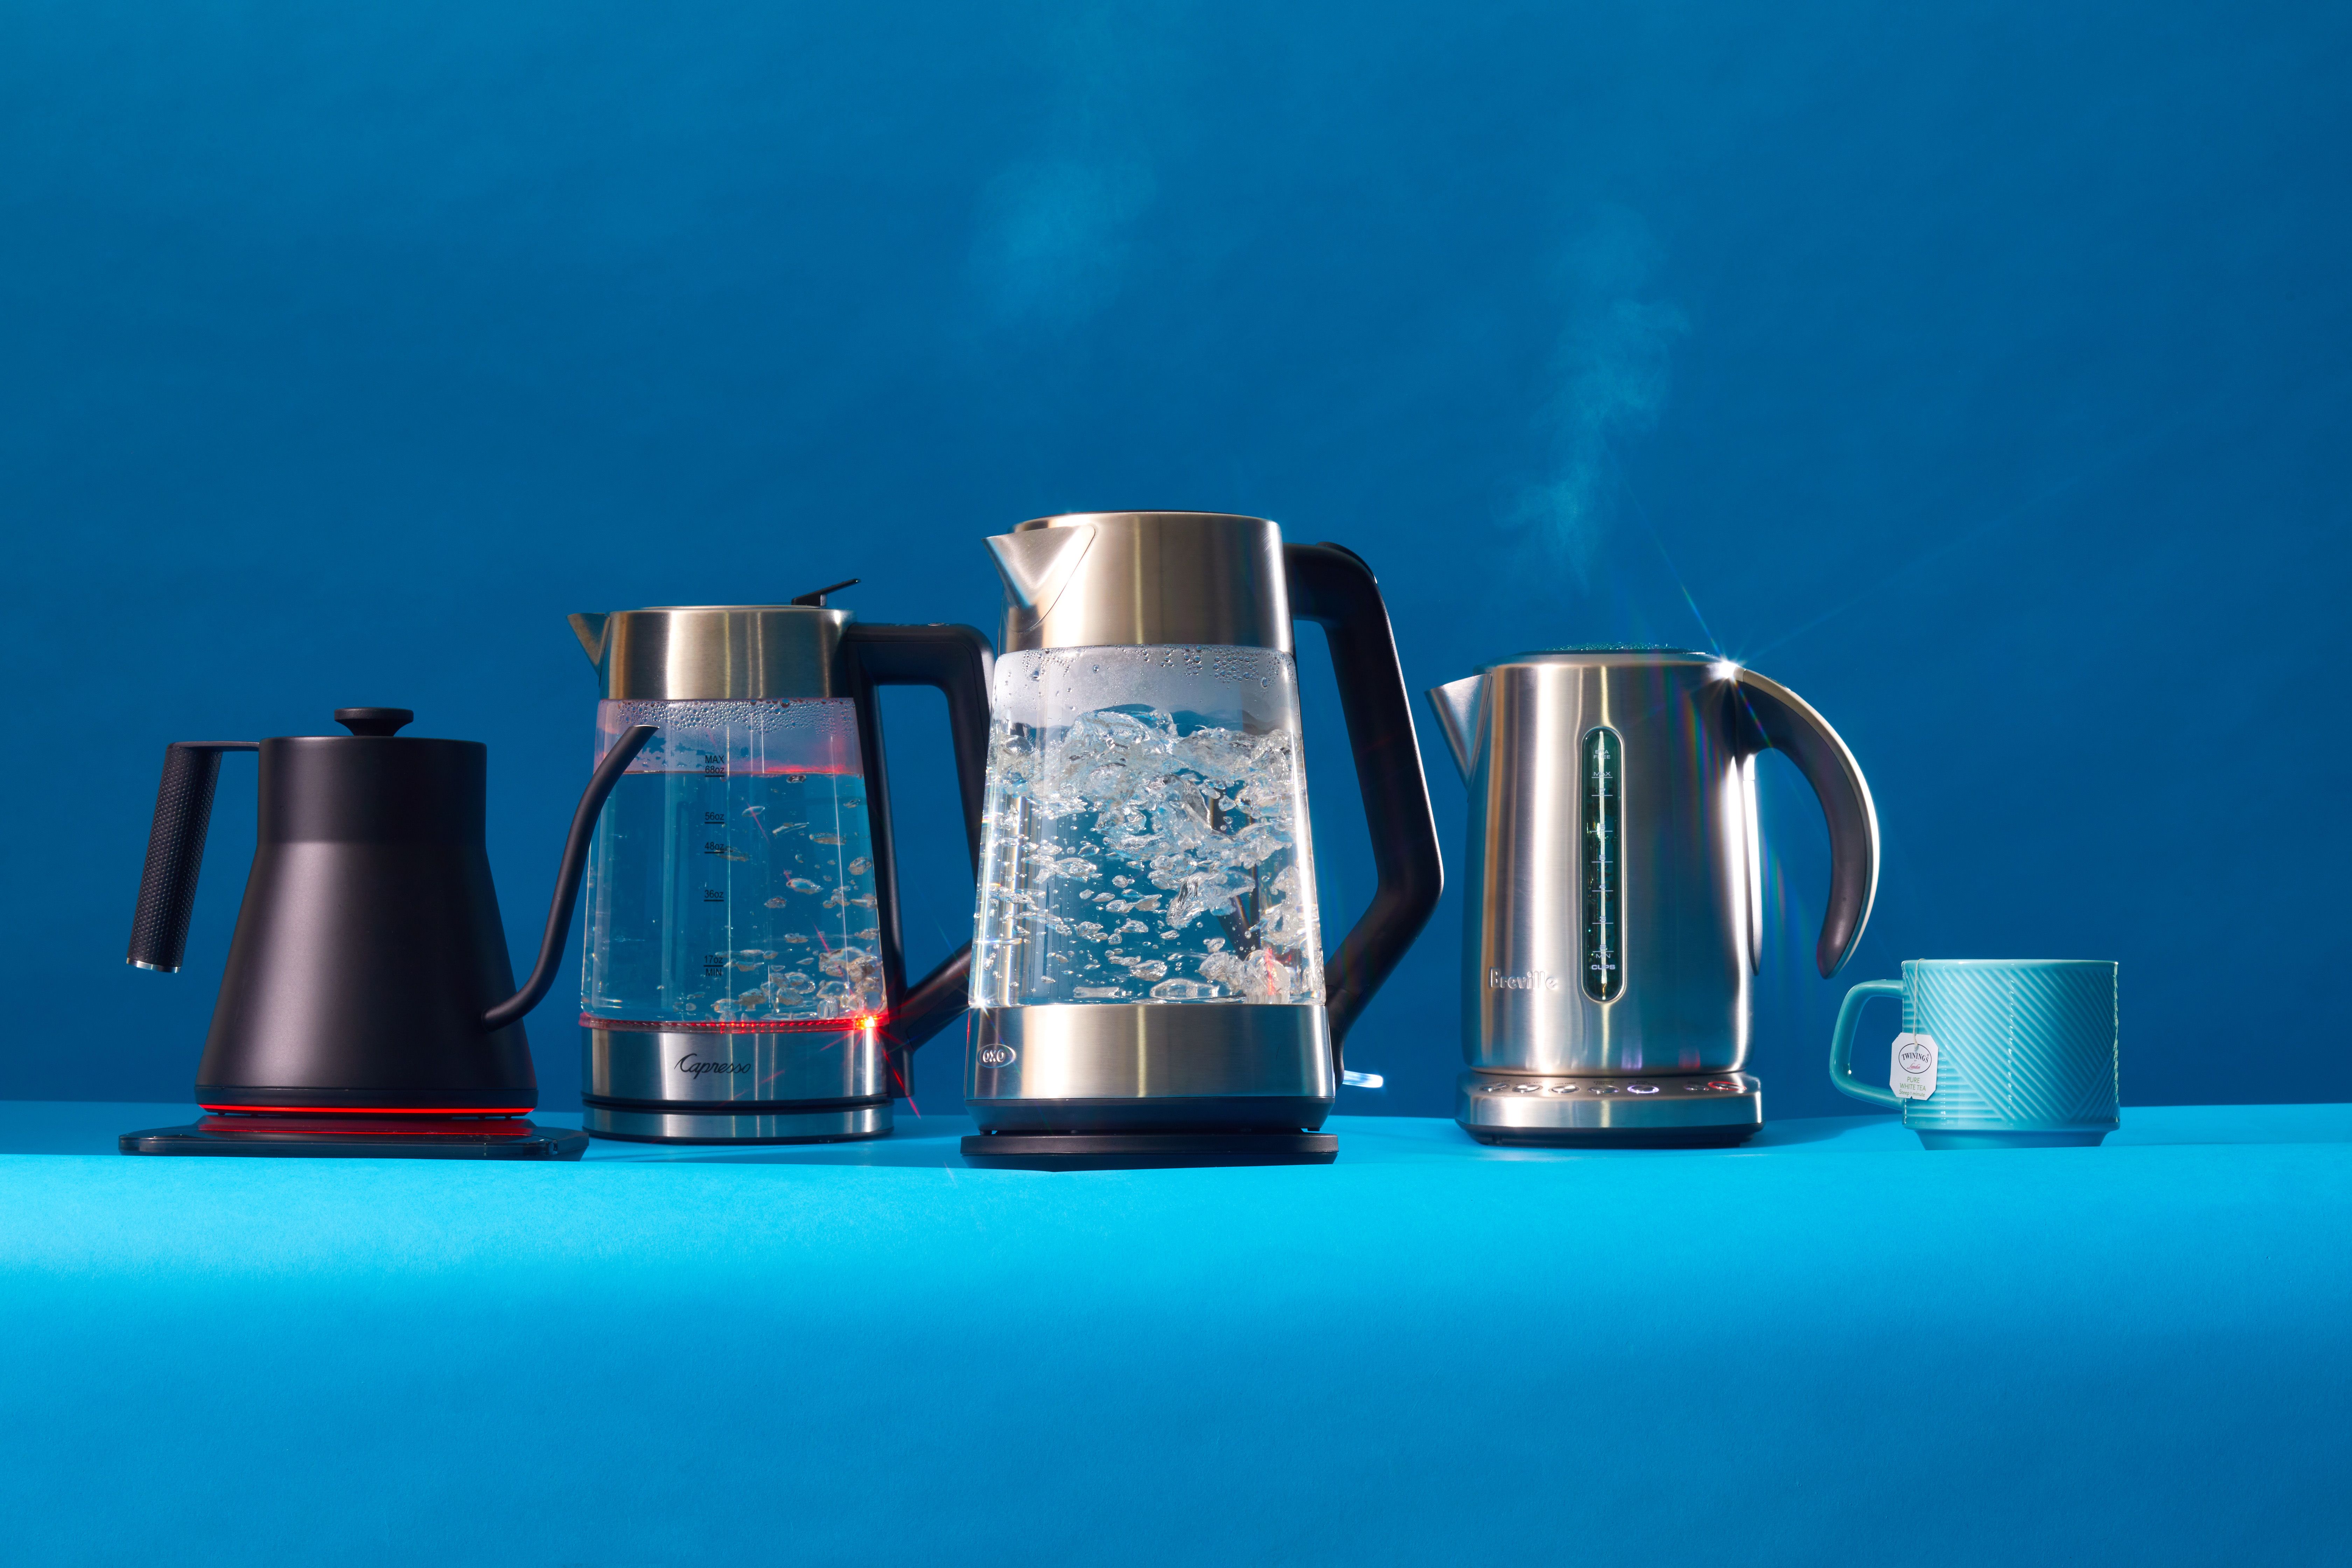 This thermally insulated kettle will keep water boiled for up to four hours